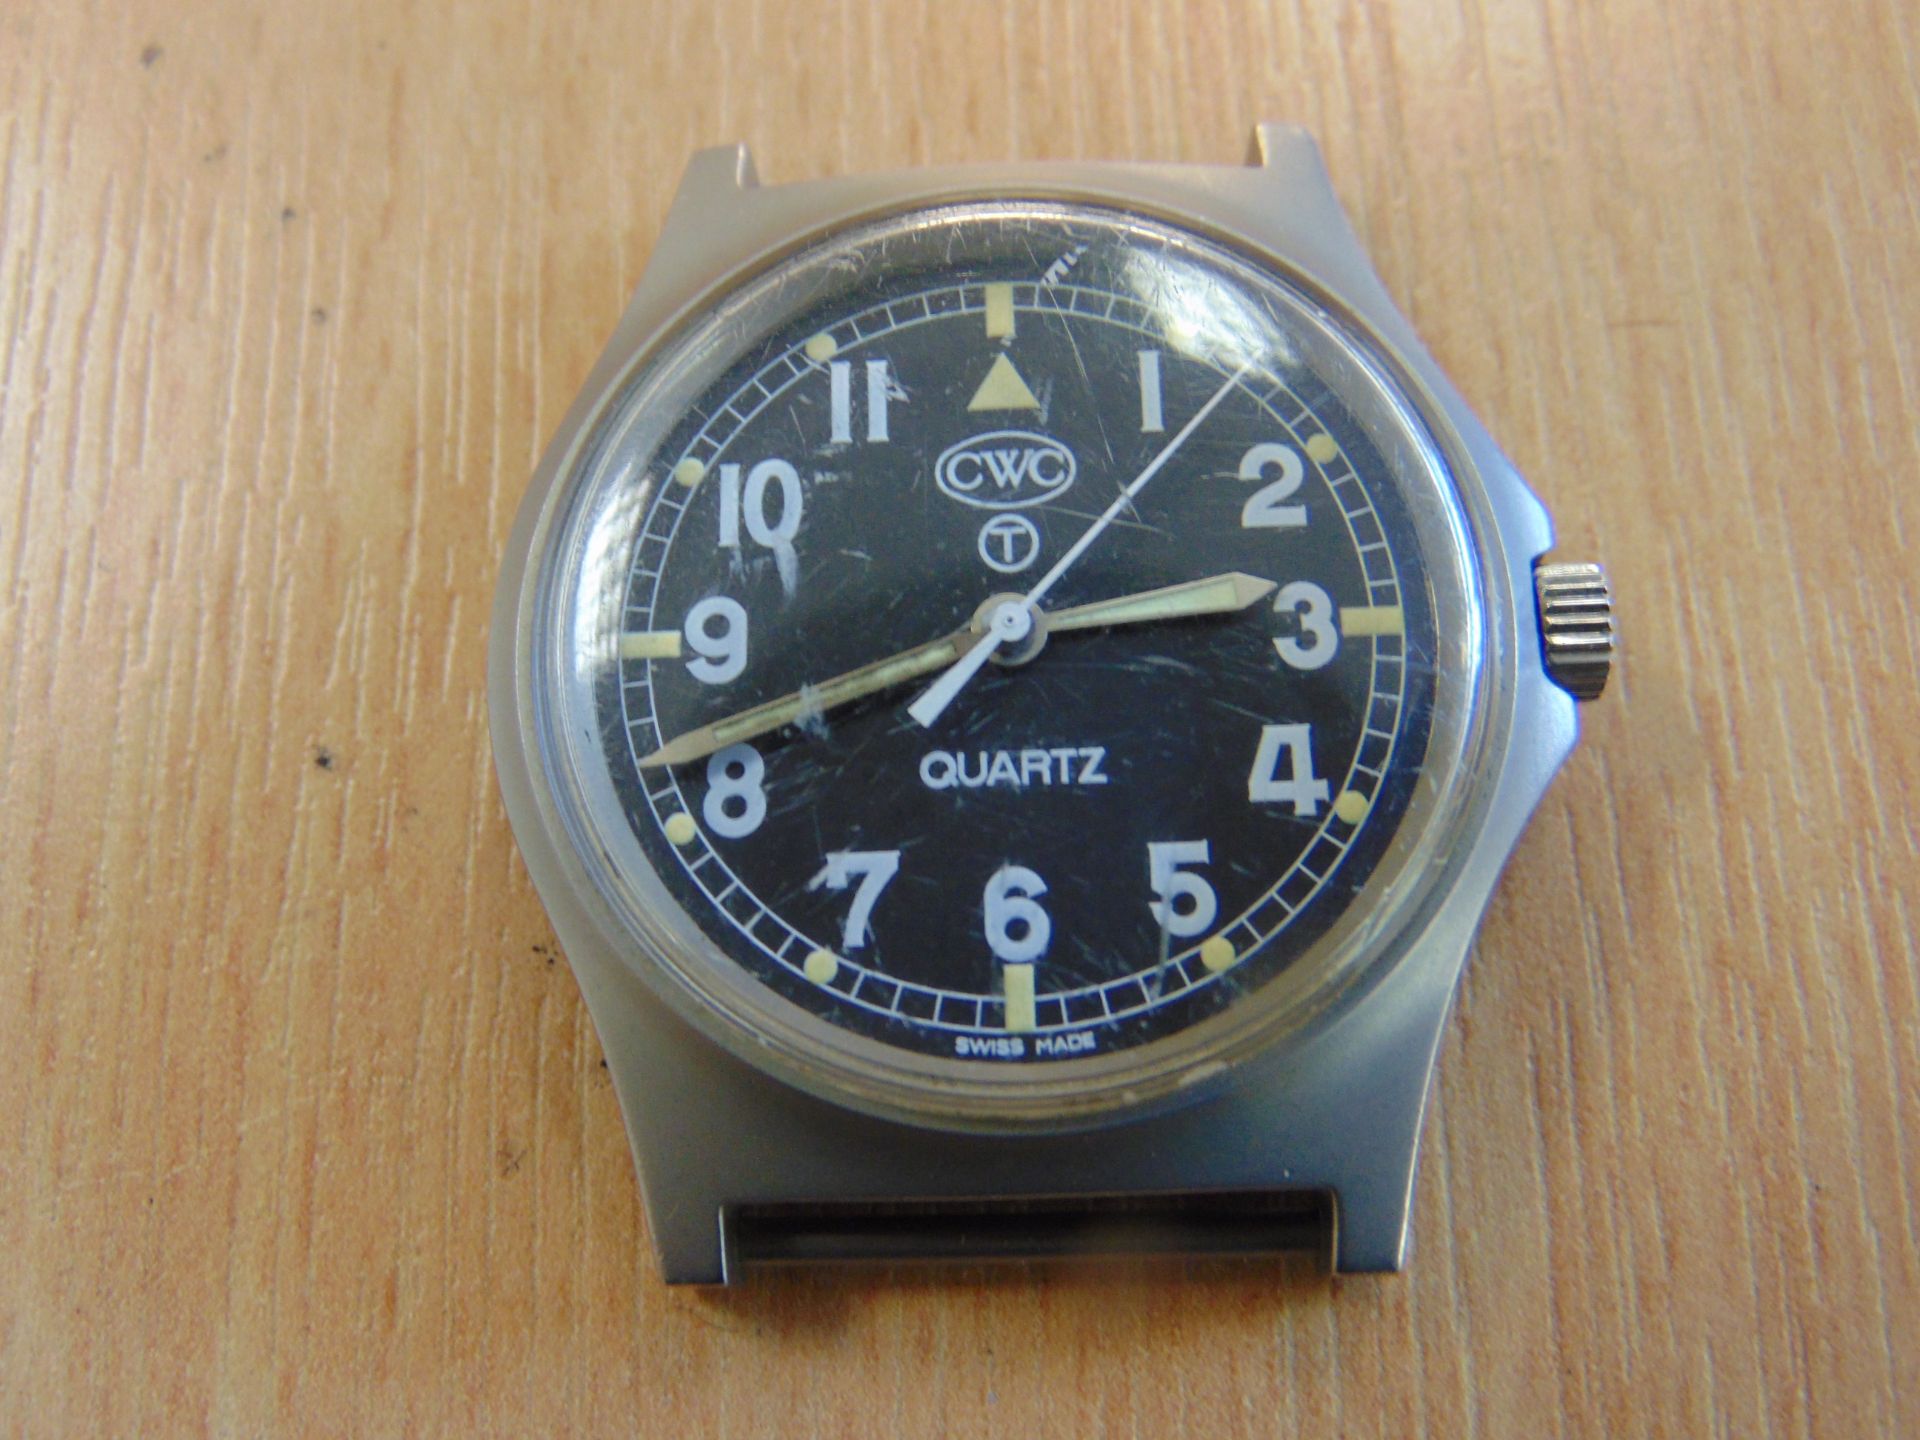 CWC W10 SERVICE WATCH NATO MARKED DATED 1998 - Image 4 of 10